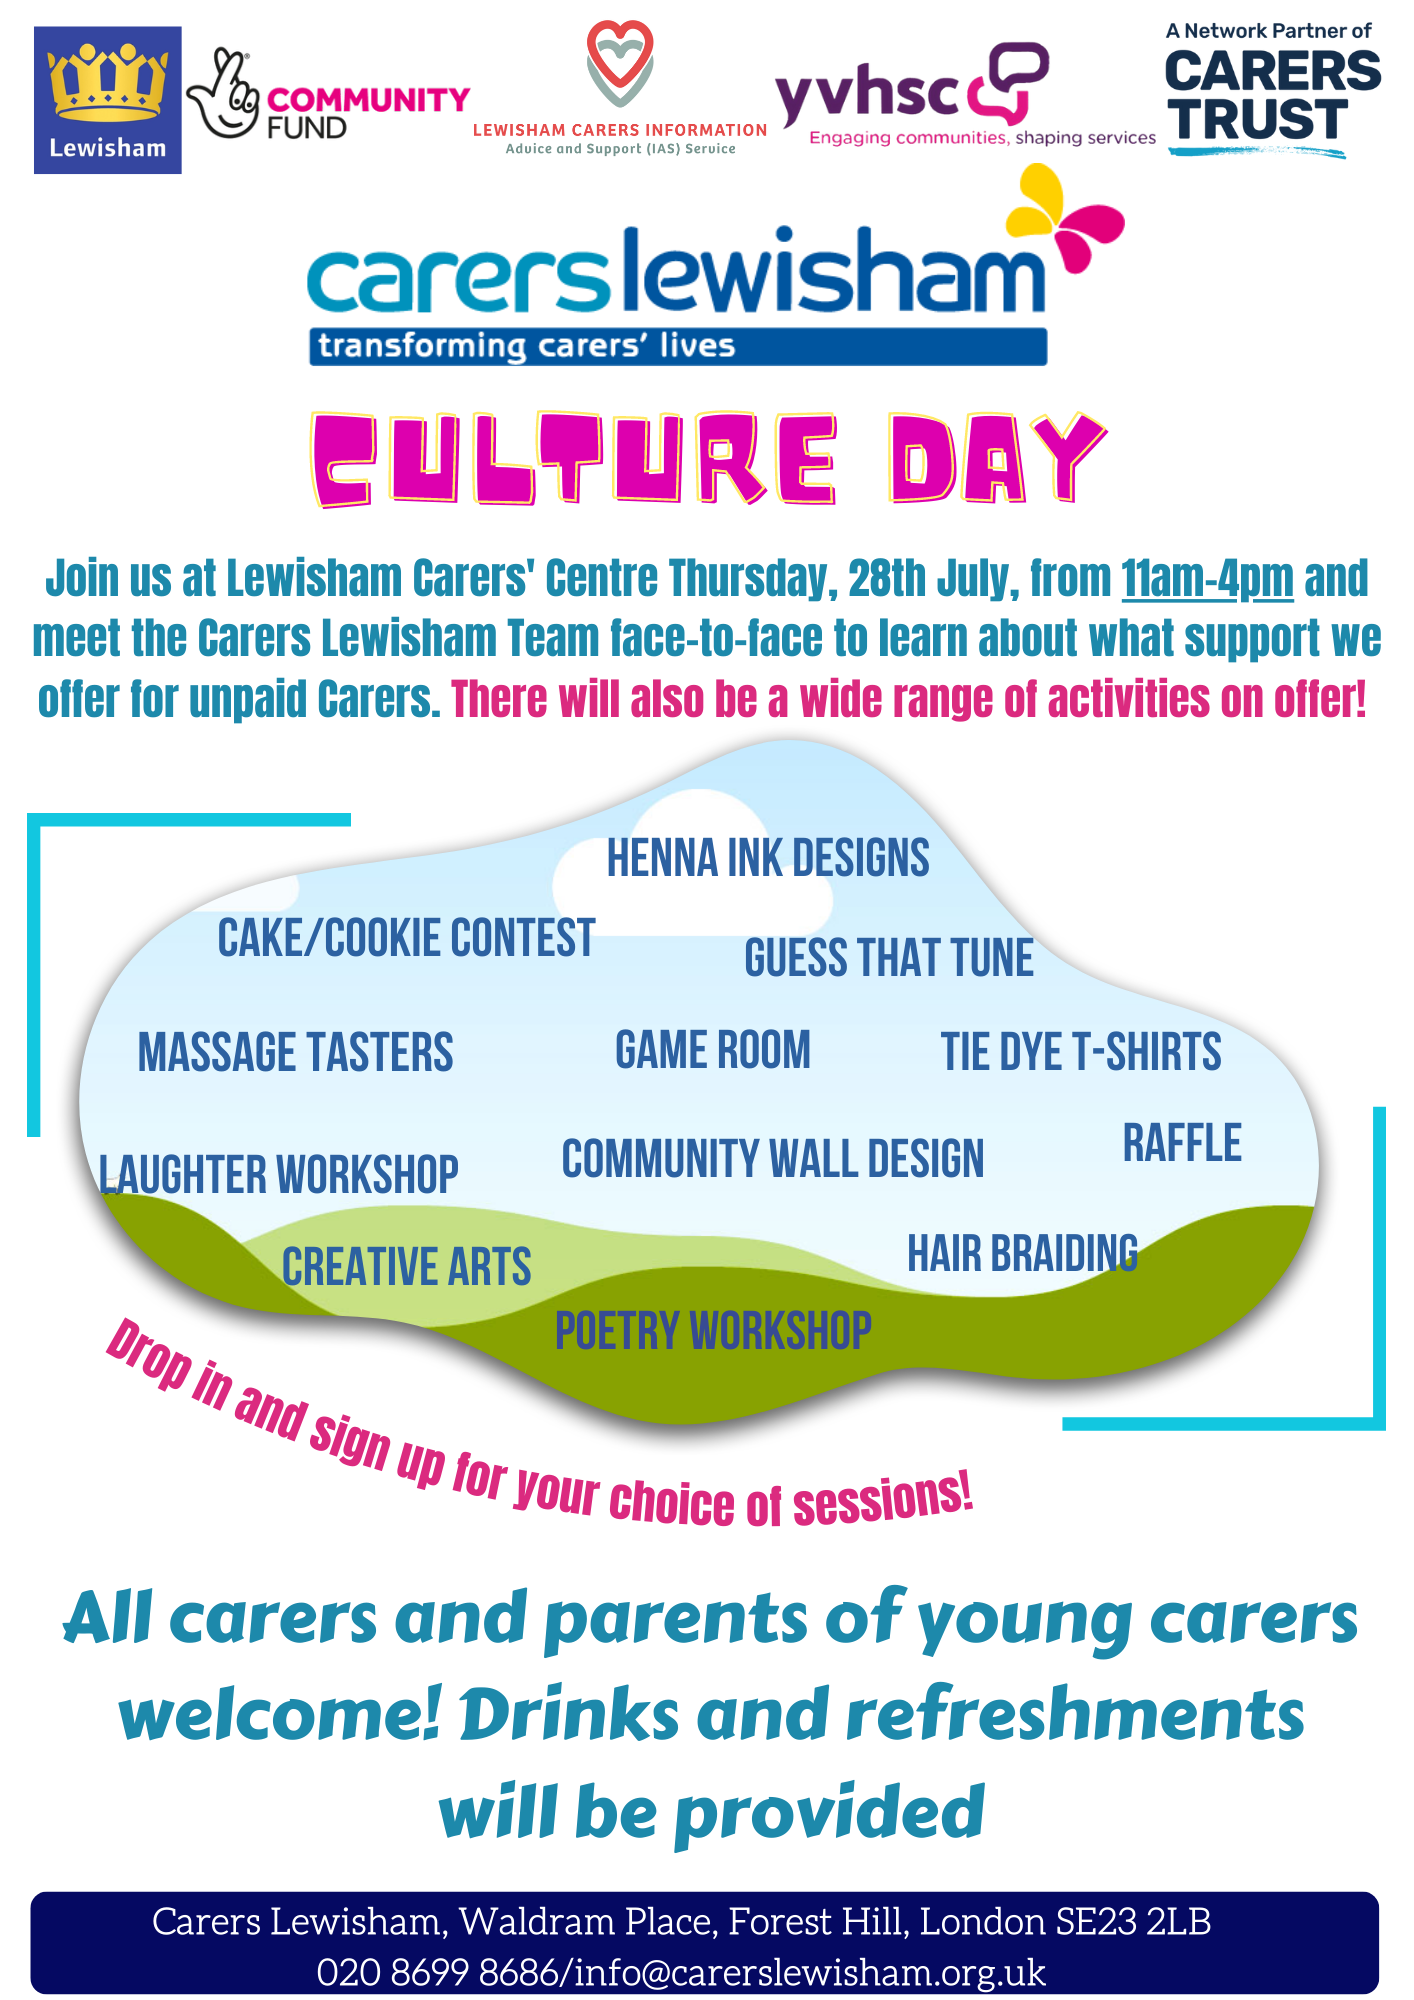 Carers Culture Day